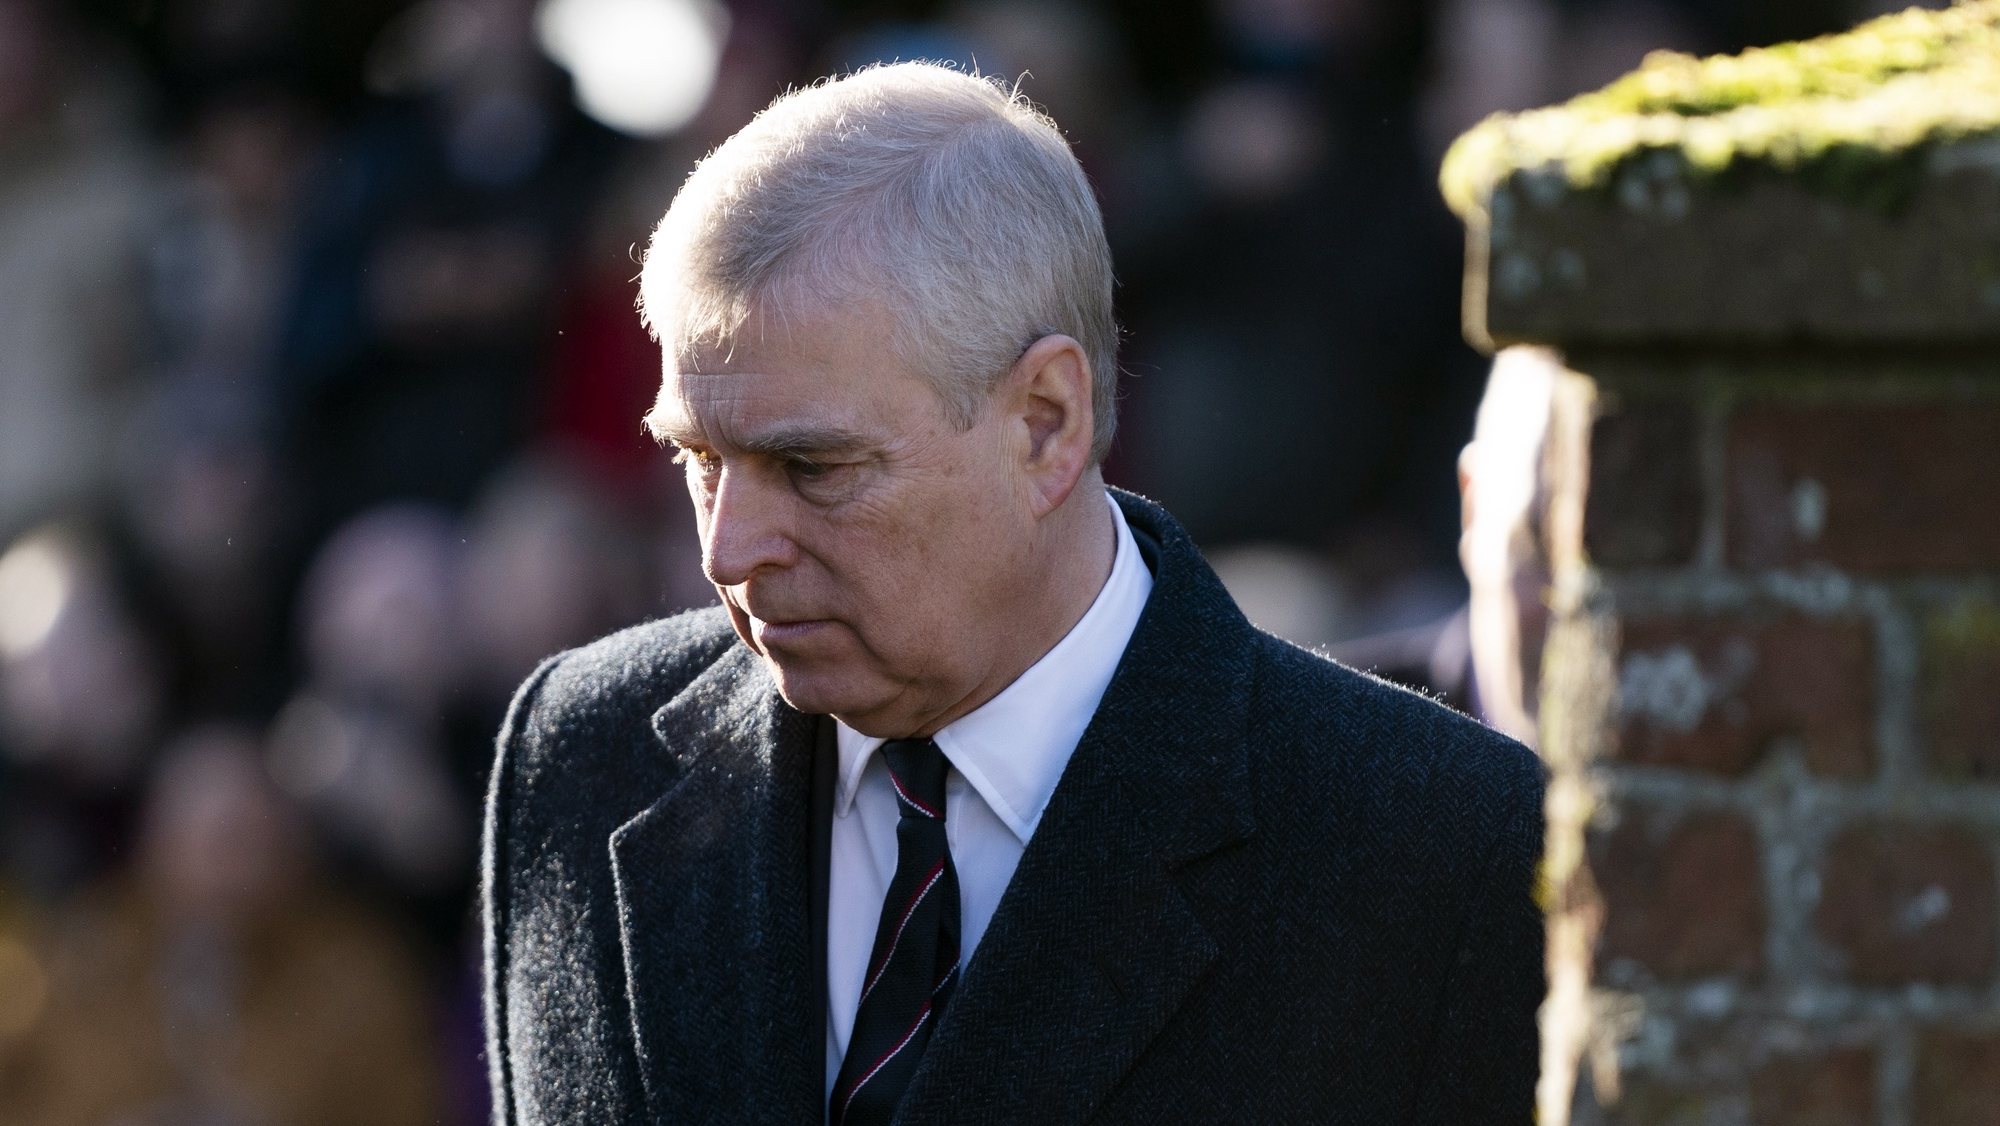 epa09479860 (FILE) - Britain&#039;s Prince Andrew, Duke of York arrives for a church service with Queen Elizabeth II (unseen) at St Mary the Virgin in Hillington, Norfolk, Britain, 19 January 2020 (reissued 21 September 2021). Prince Andrew on 20 September 2021 has been served with legal papers relating to a sexual assault lawsuit against him in the United States, US court documents show.  EPA/WILL OLIVER *** Local Caption *** 55780798